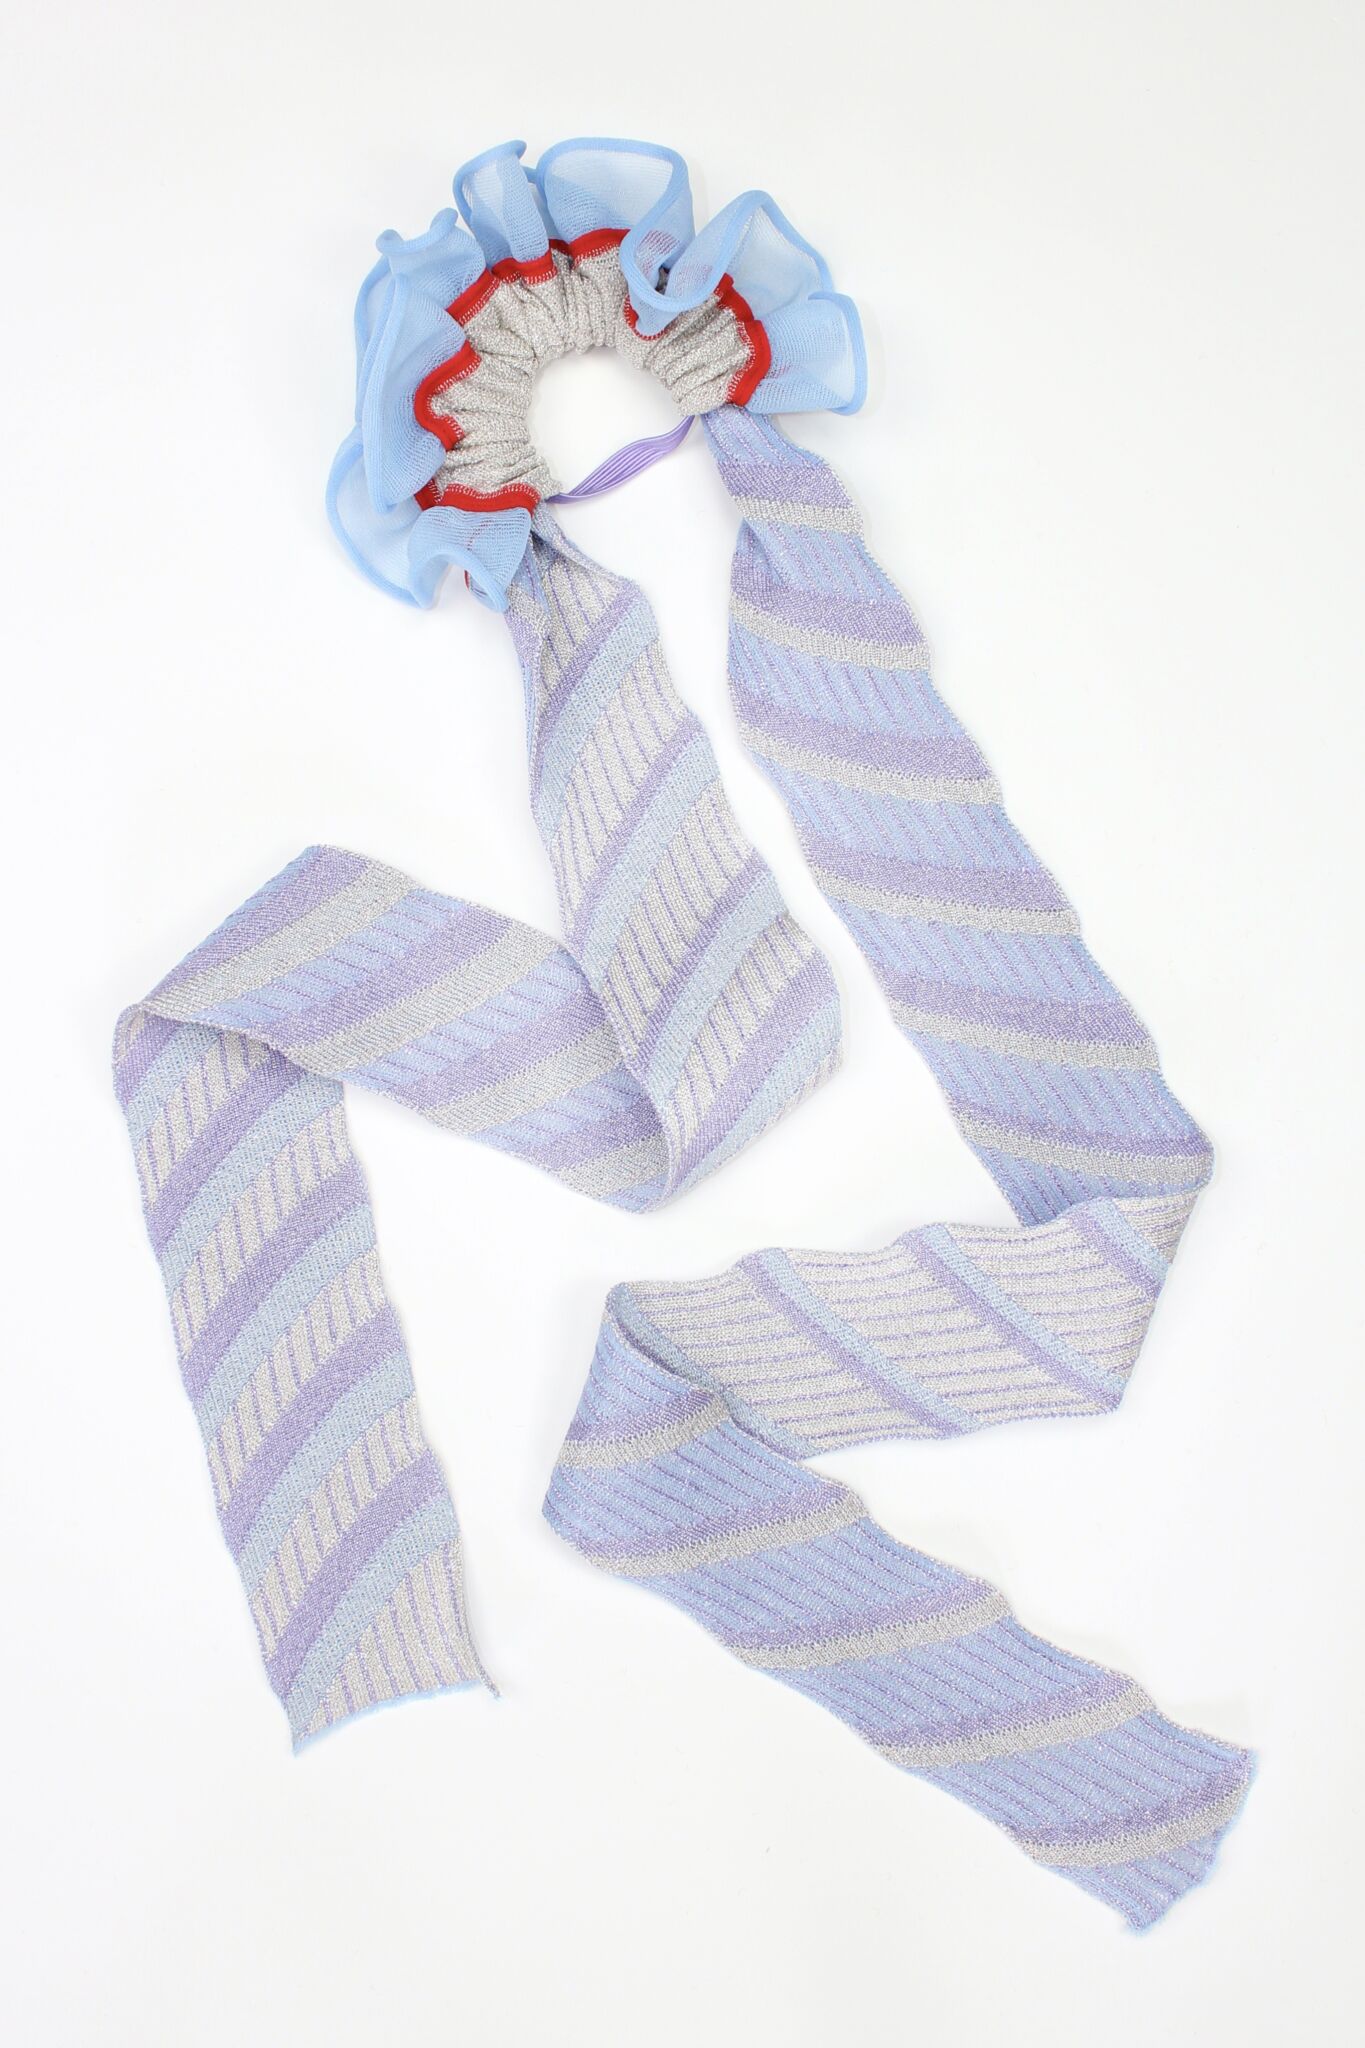 Gazania Scrunchie in light blue and silver is a knitted scrunchie with striped jacquard ties. Made of transparent and shimmery yarns.